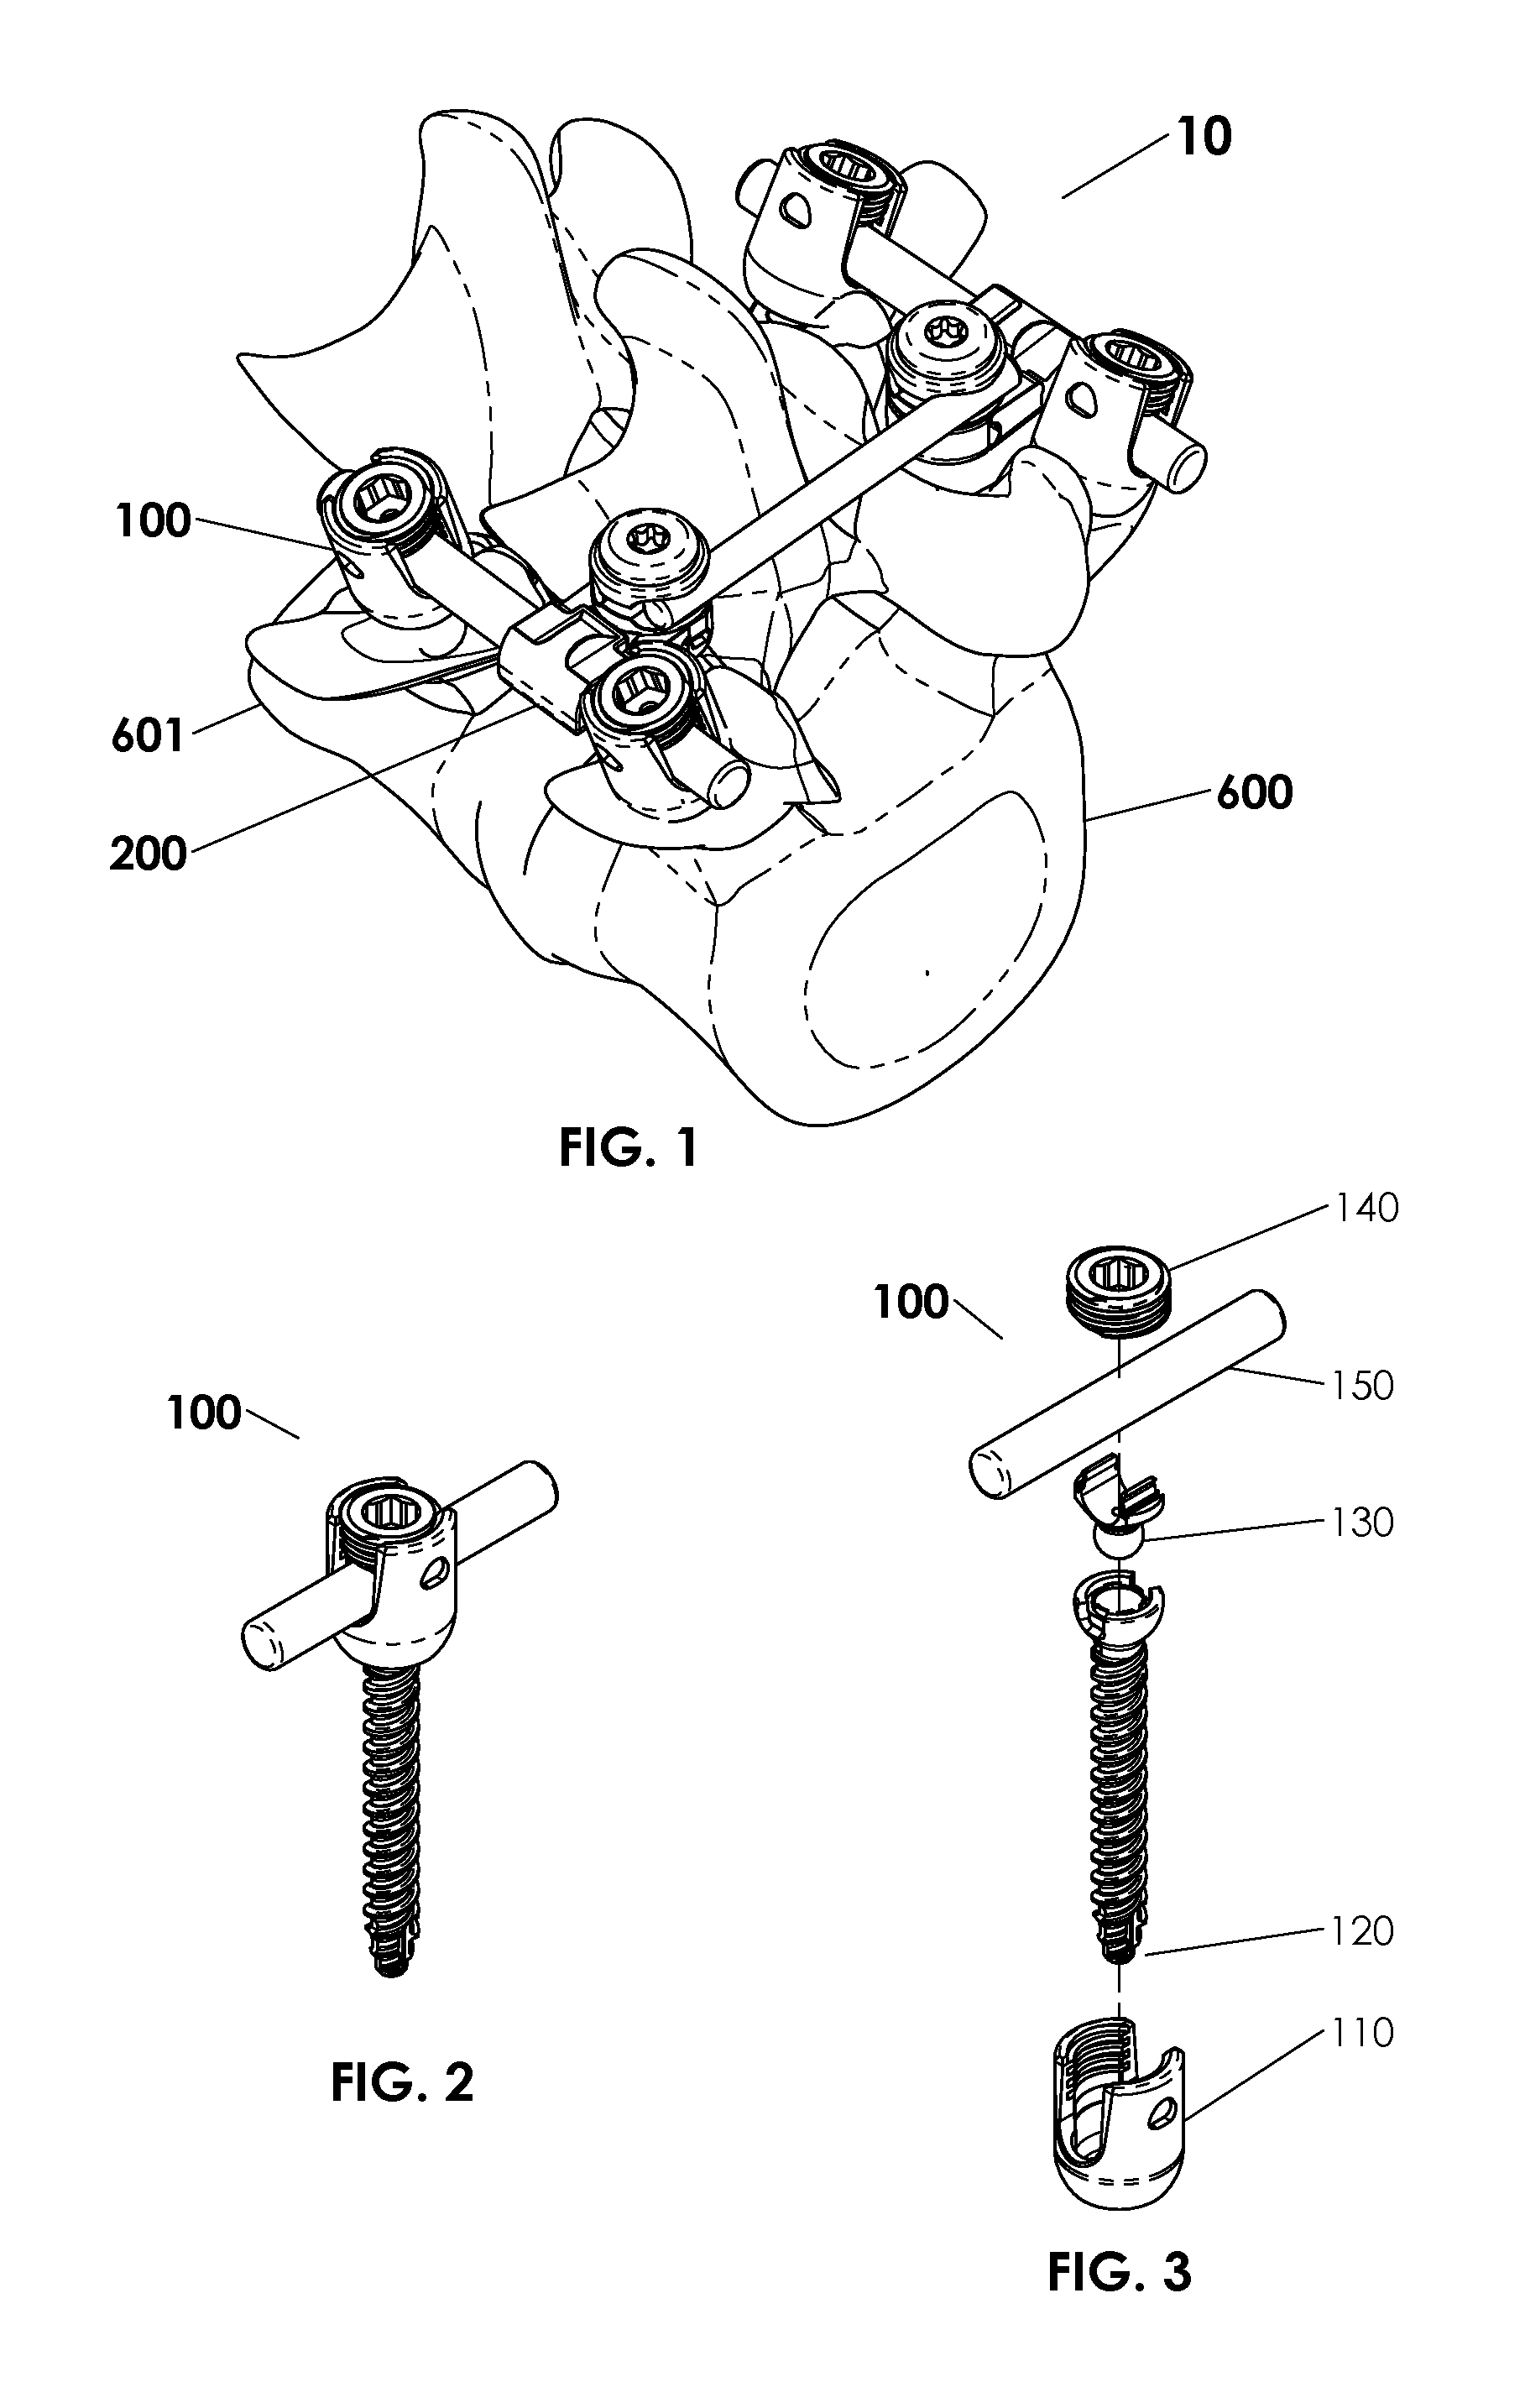 Spinal stabilization system